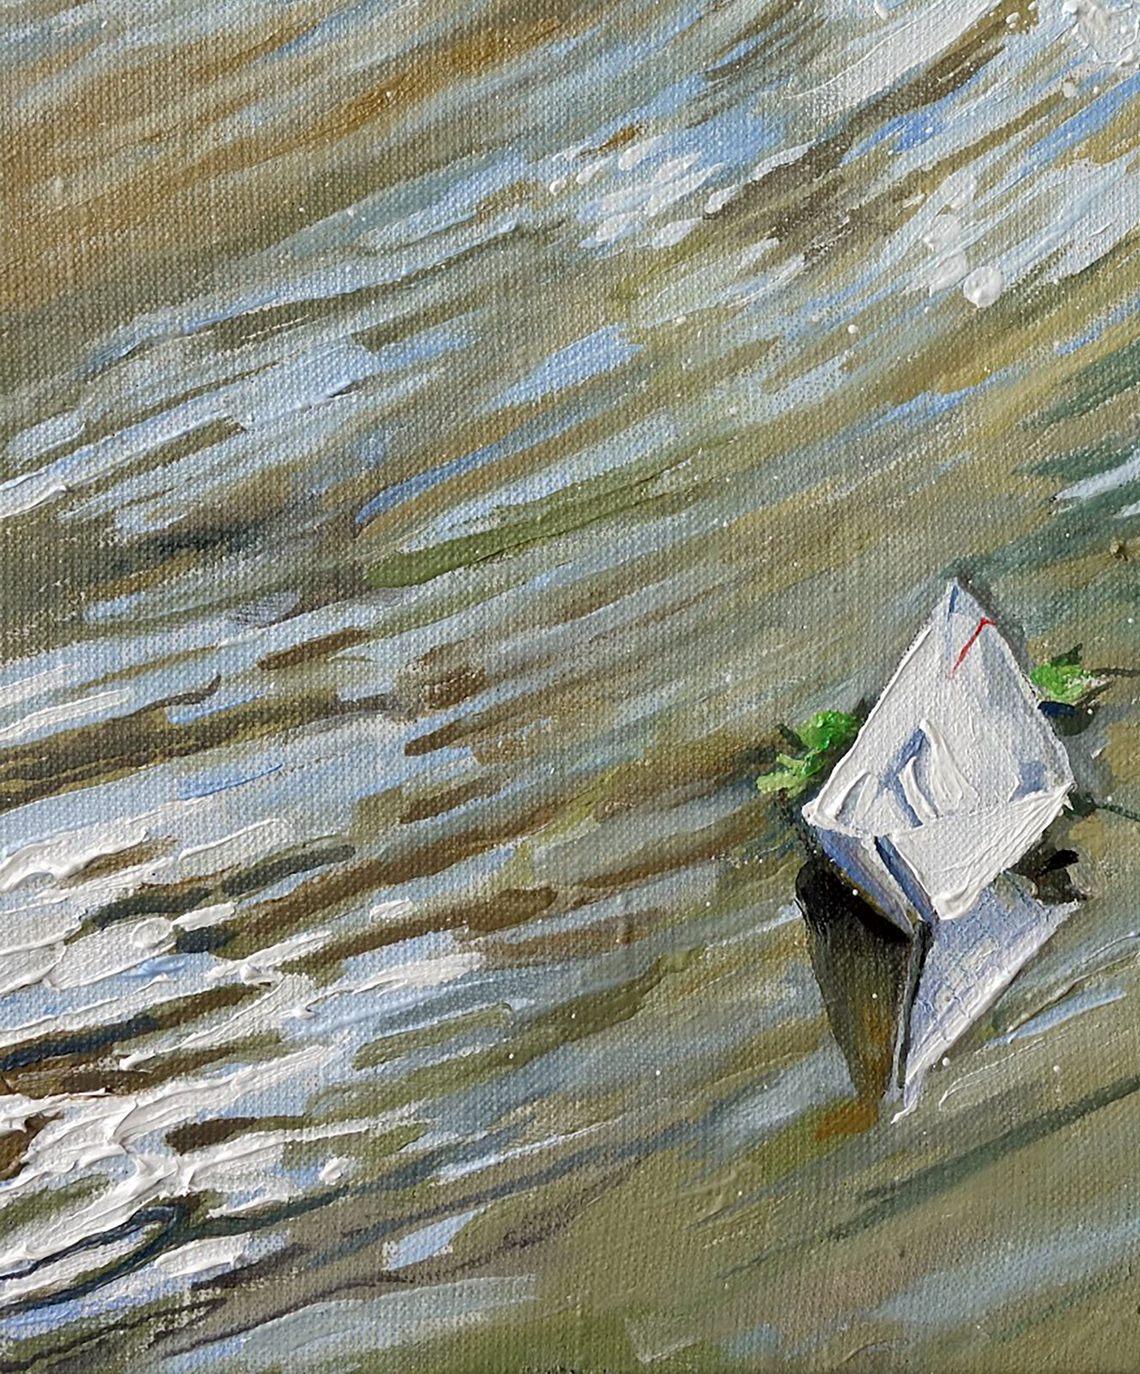 Artist: Varvarov Anatoly Viktorovich
Title: Gravity
Sise: 16x12 inches, (40x30 cm)
Medium: Oil on Canvas
Hand painted, original, one of a kind, Ready to Hang

A paper boat floating down a fast stream is the focus of this oil painting. The title,